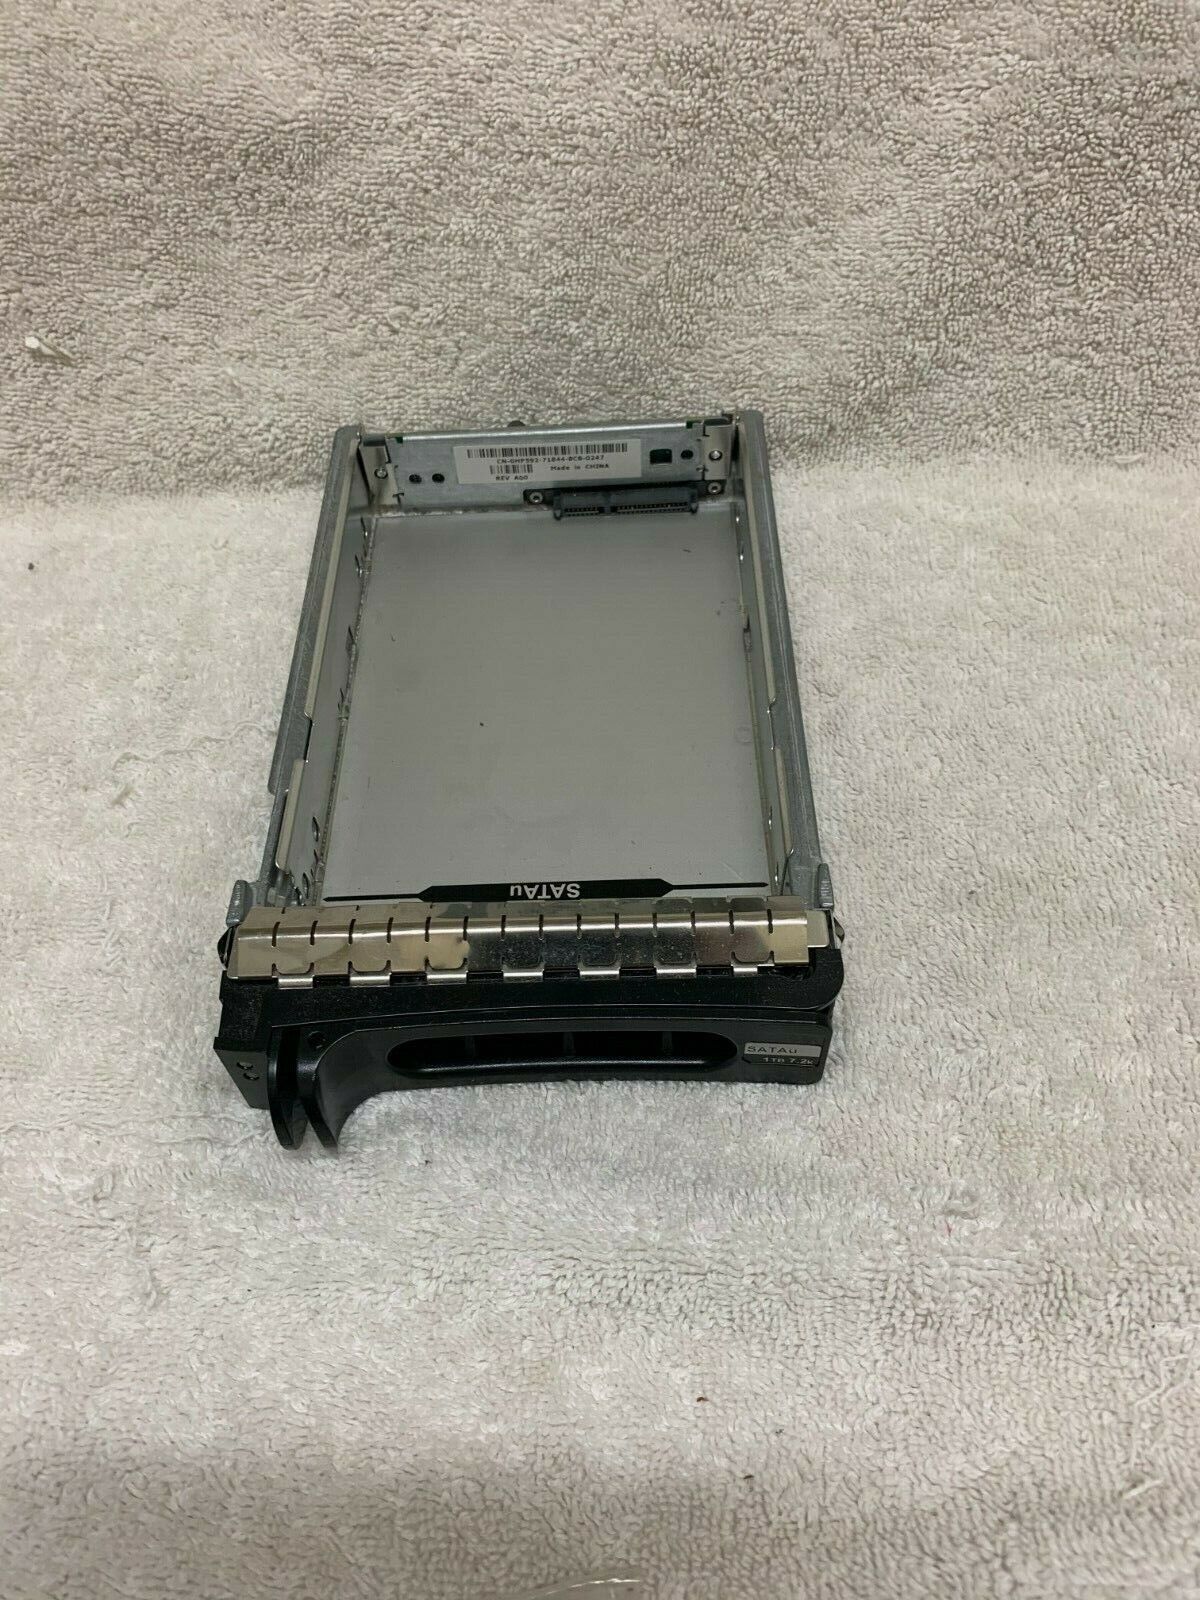 Dell 0D962C SATAu HDD Caddy Tray PowerEdge 1950 2950 PowerVault MD1000 MD3000